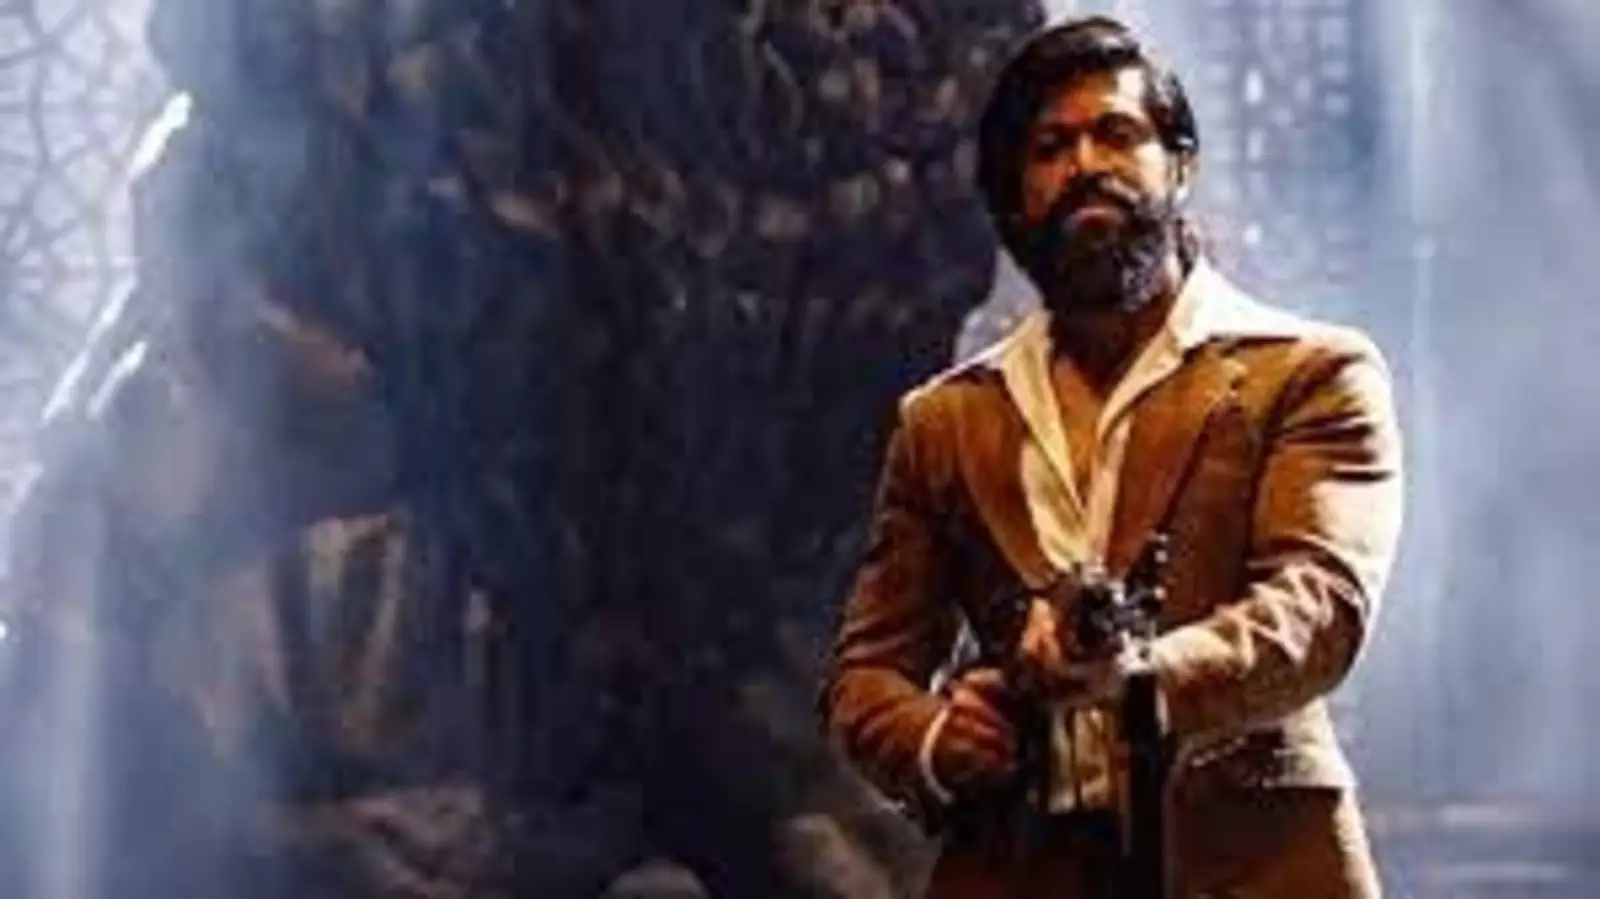 KGF Chapter 2 Twitter reviews: Fans call Yash’s performance ‘god-level,’ say Sanjay Dutt was ‘breathtaking’